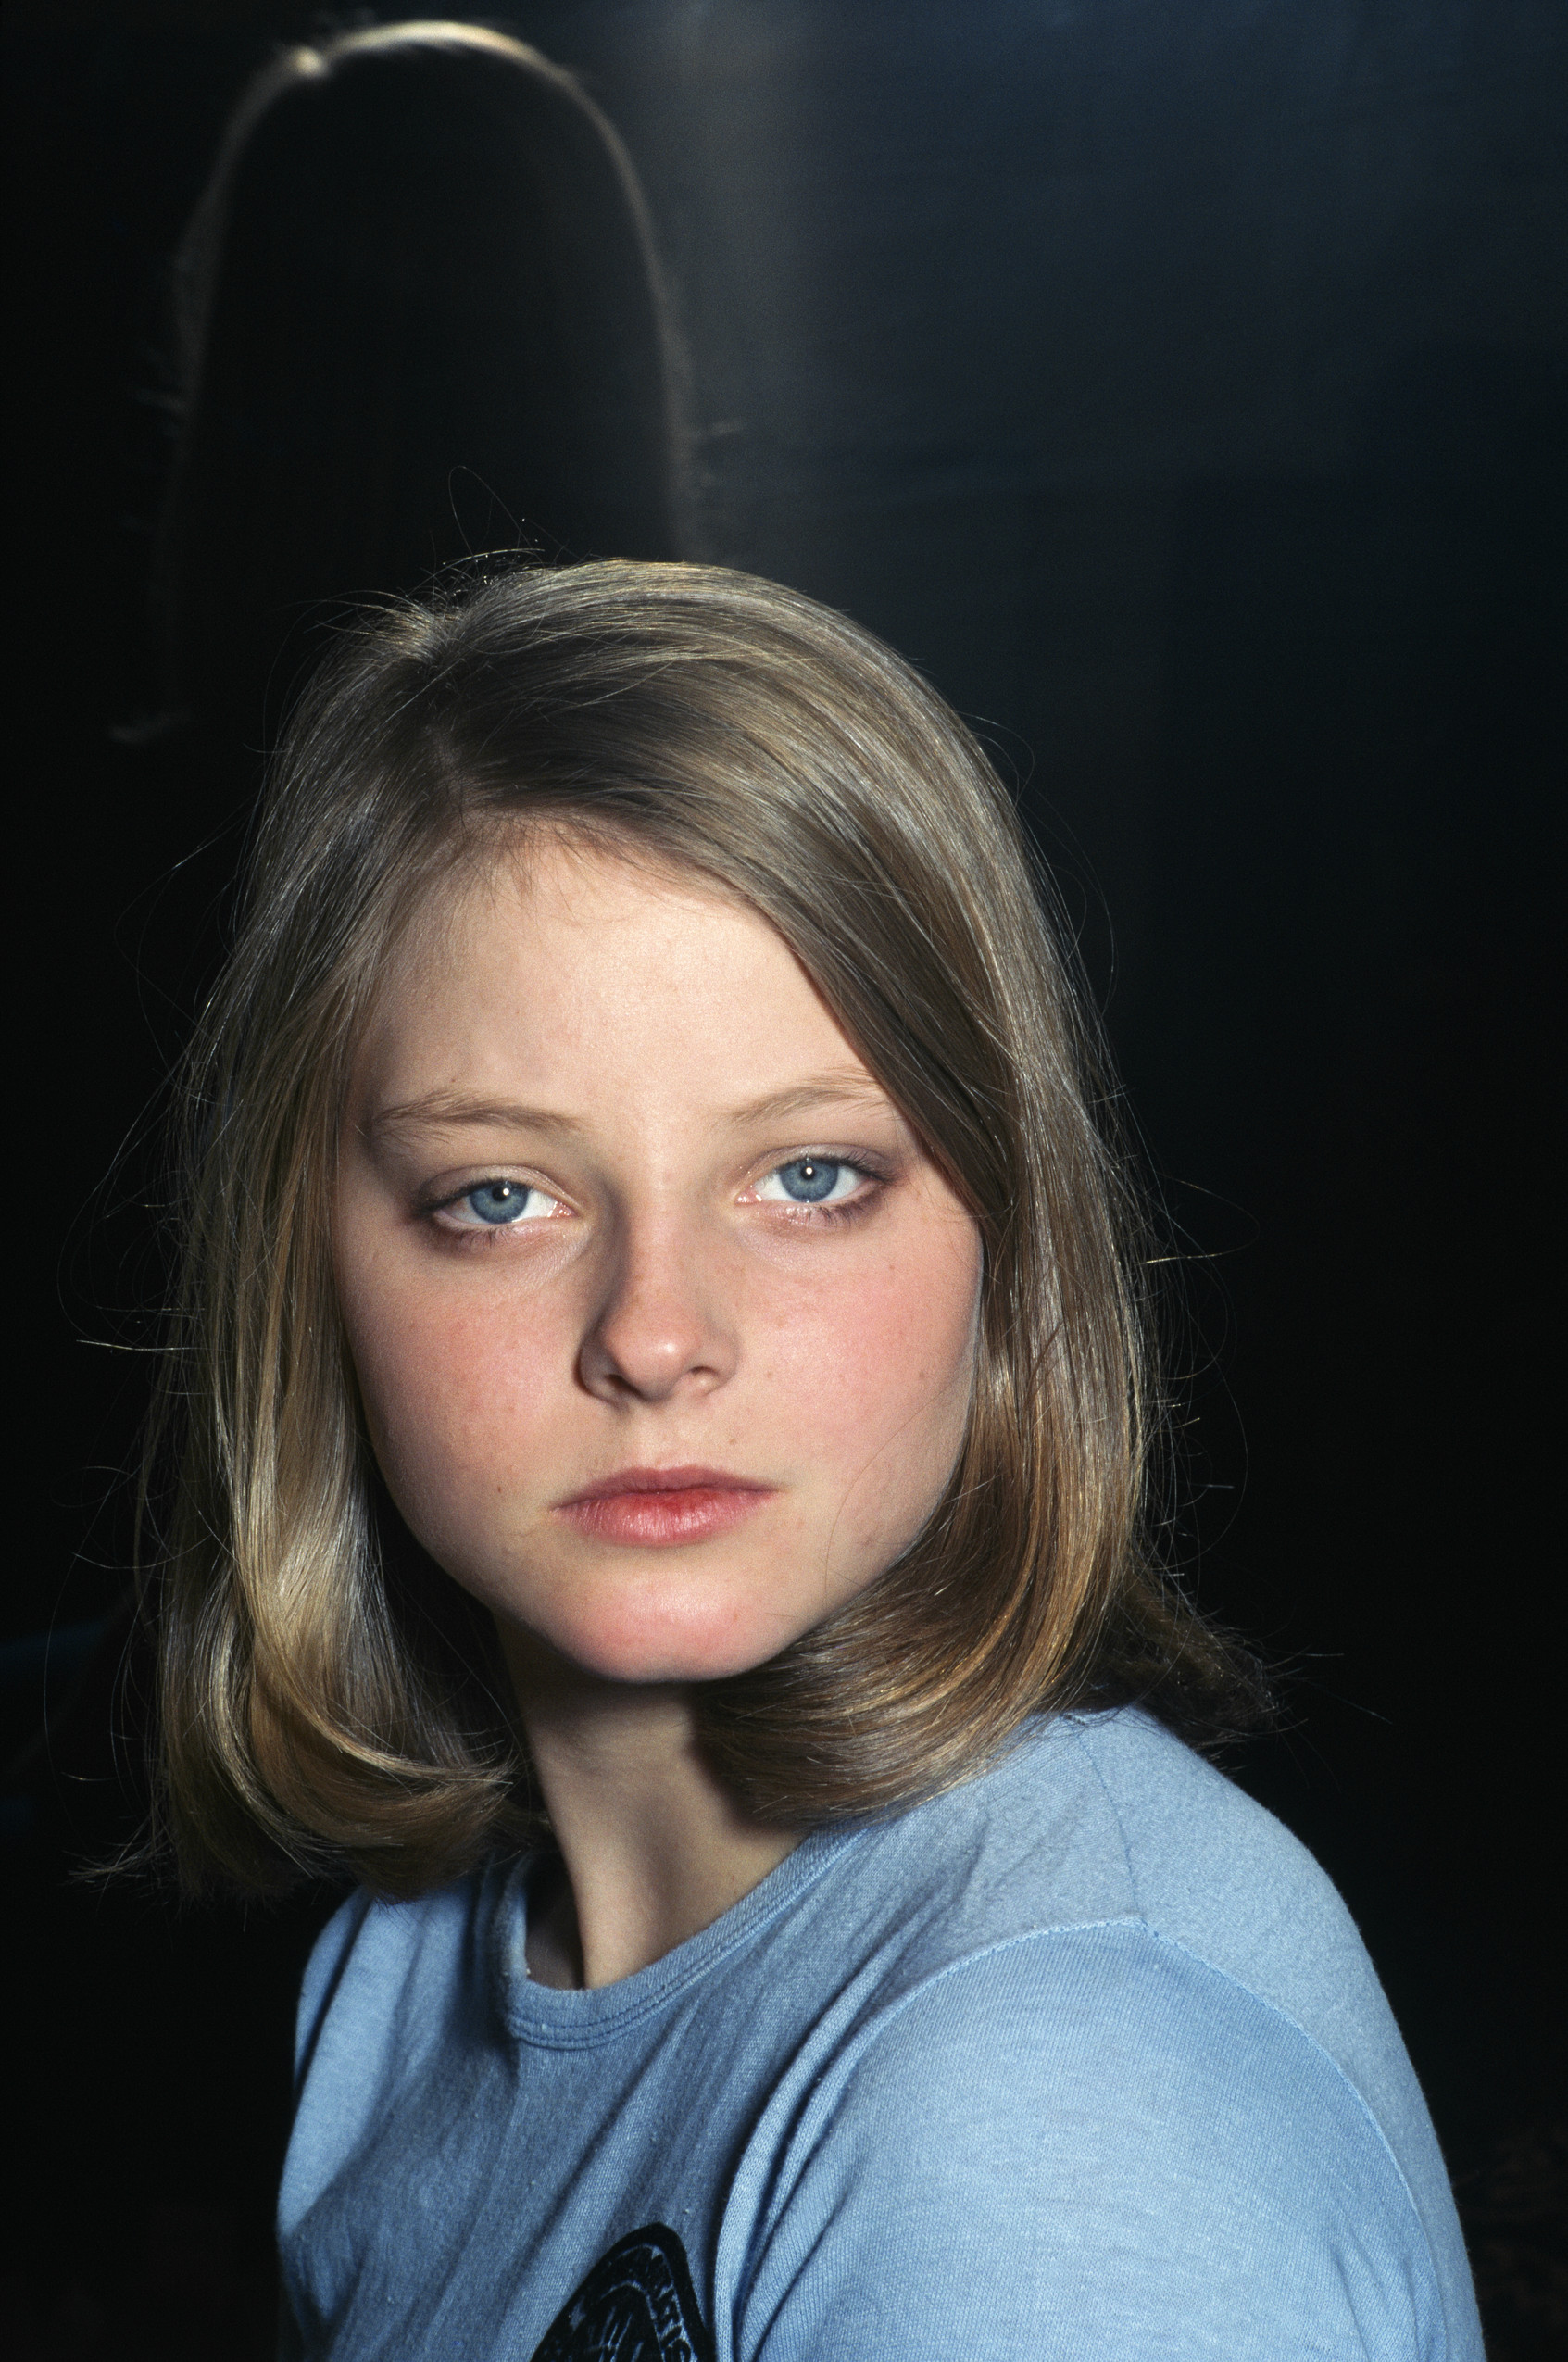 Jodie Foster Backgrounds, Compatible - PC, Mobile, Gadgets| 1693x2550 px